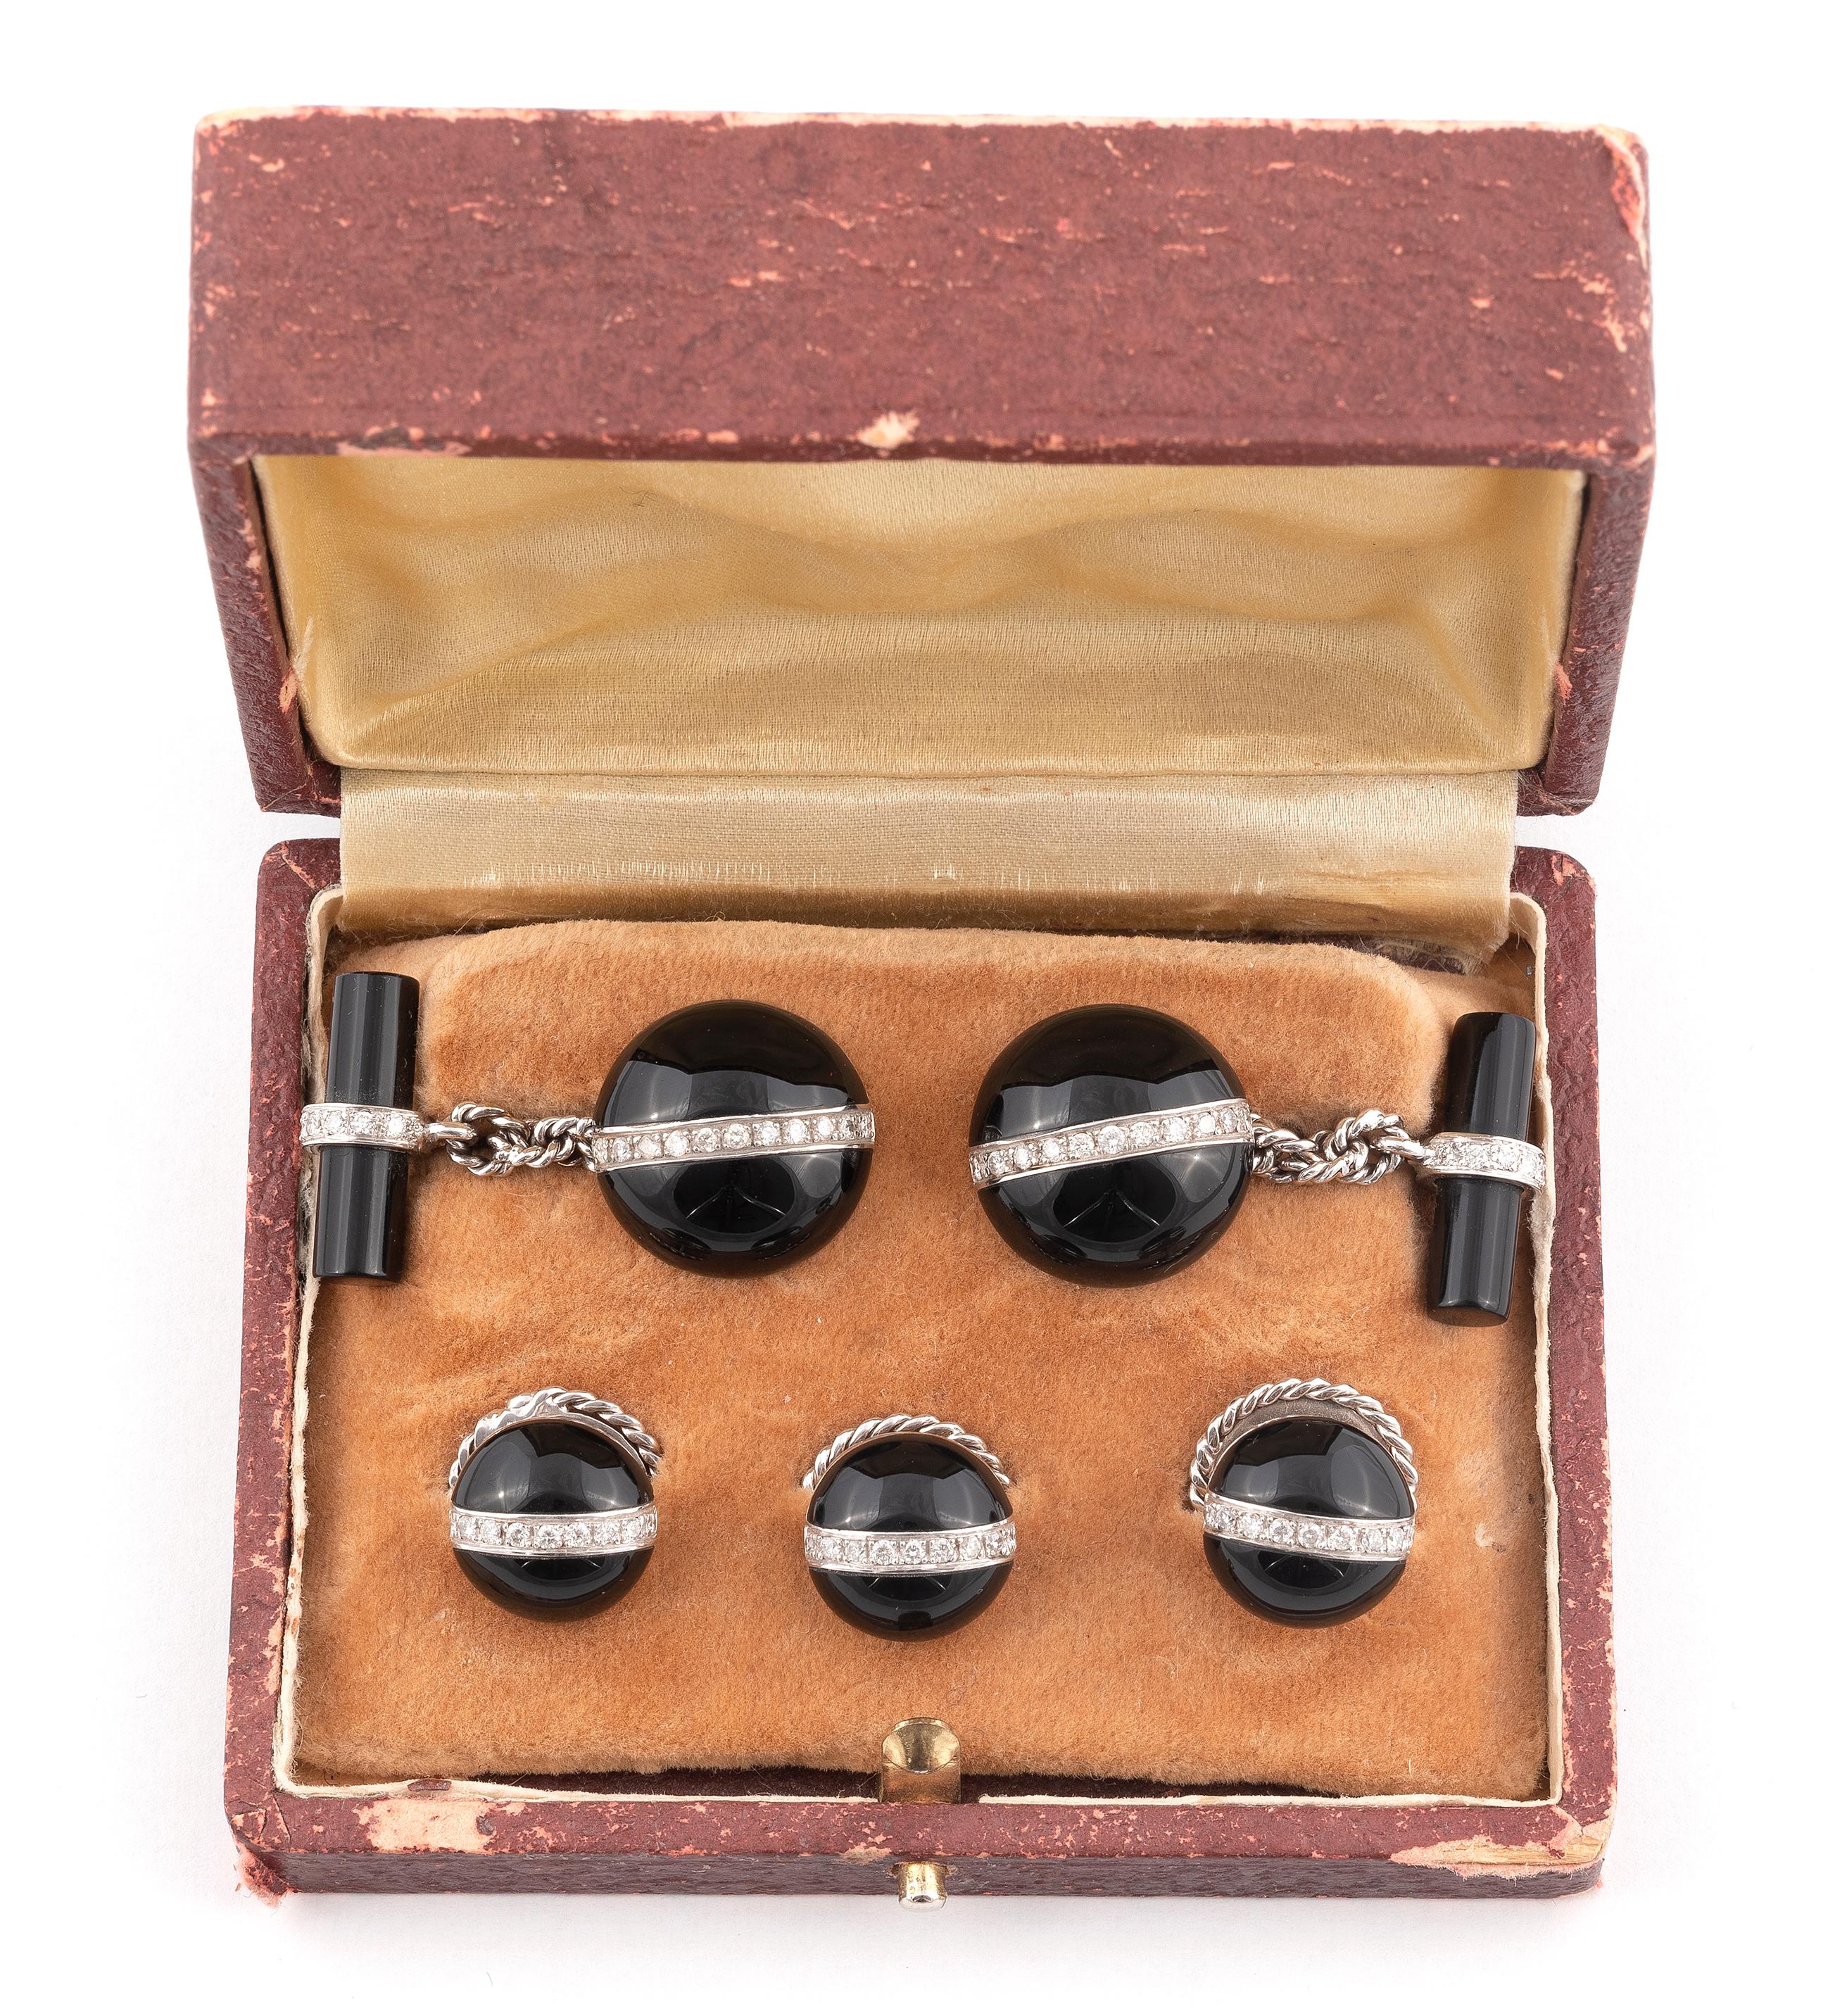 
Each cufflink of circular design with central diamond line detail, three buttons en suite, circa 1950, in beige filt fitted case.